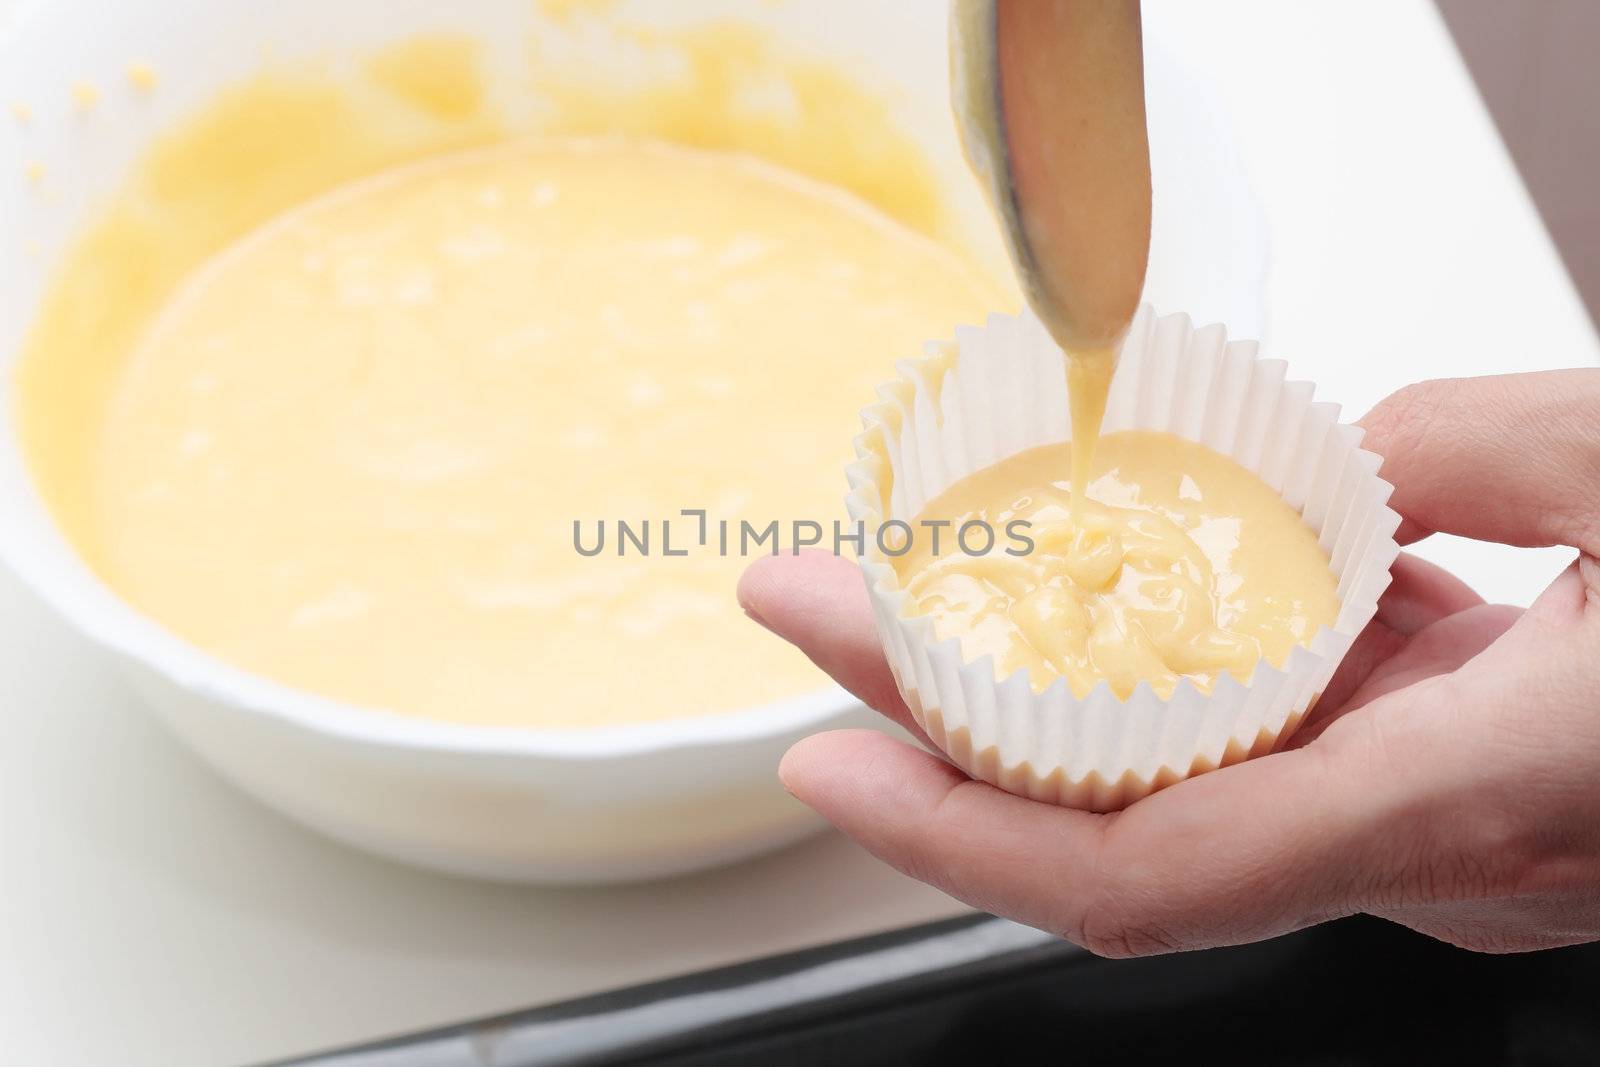 by filling molds of muffins with home-made dough with natural ingredients